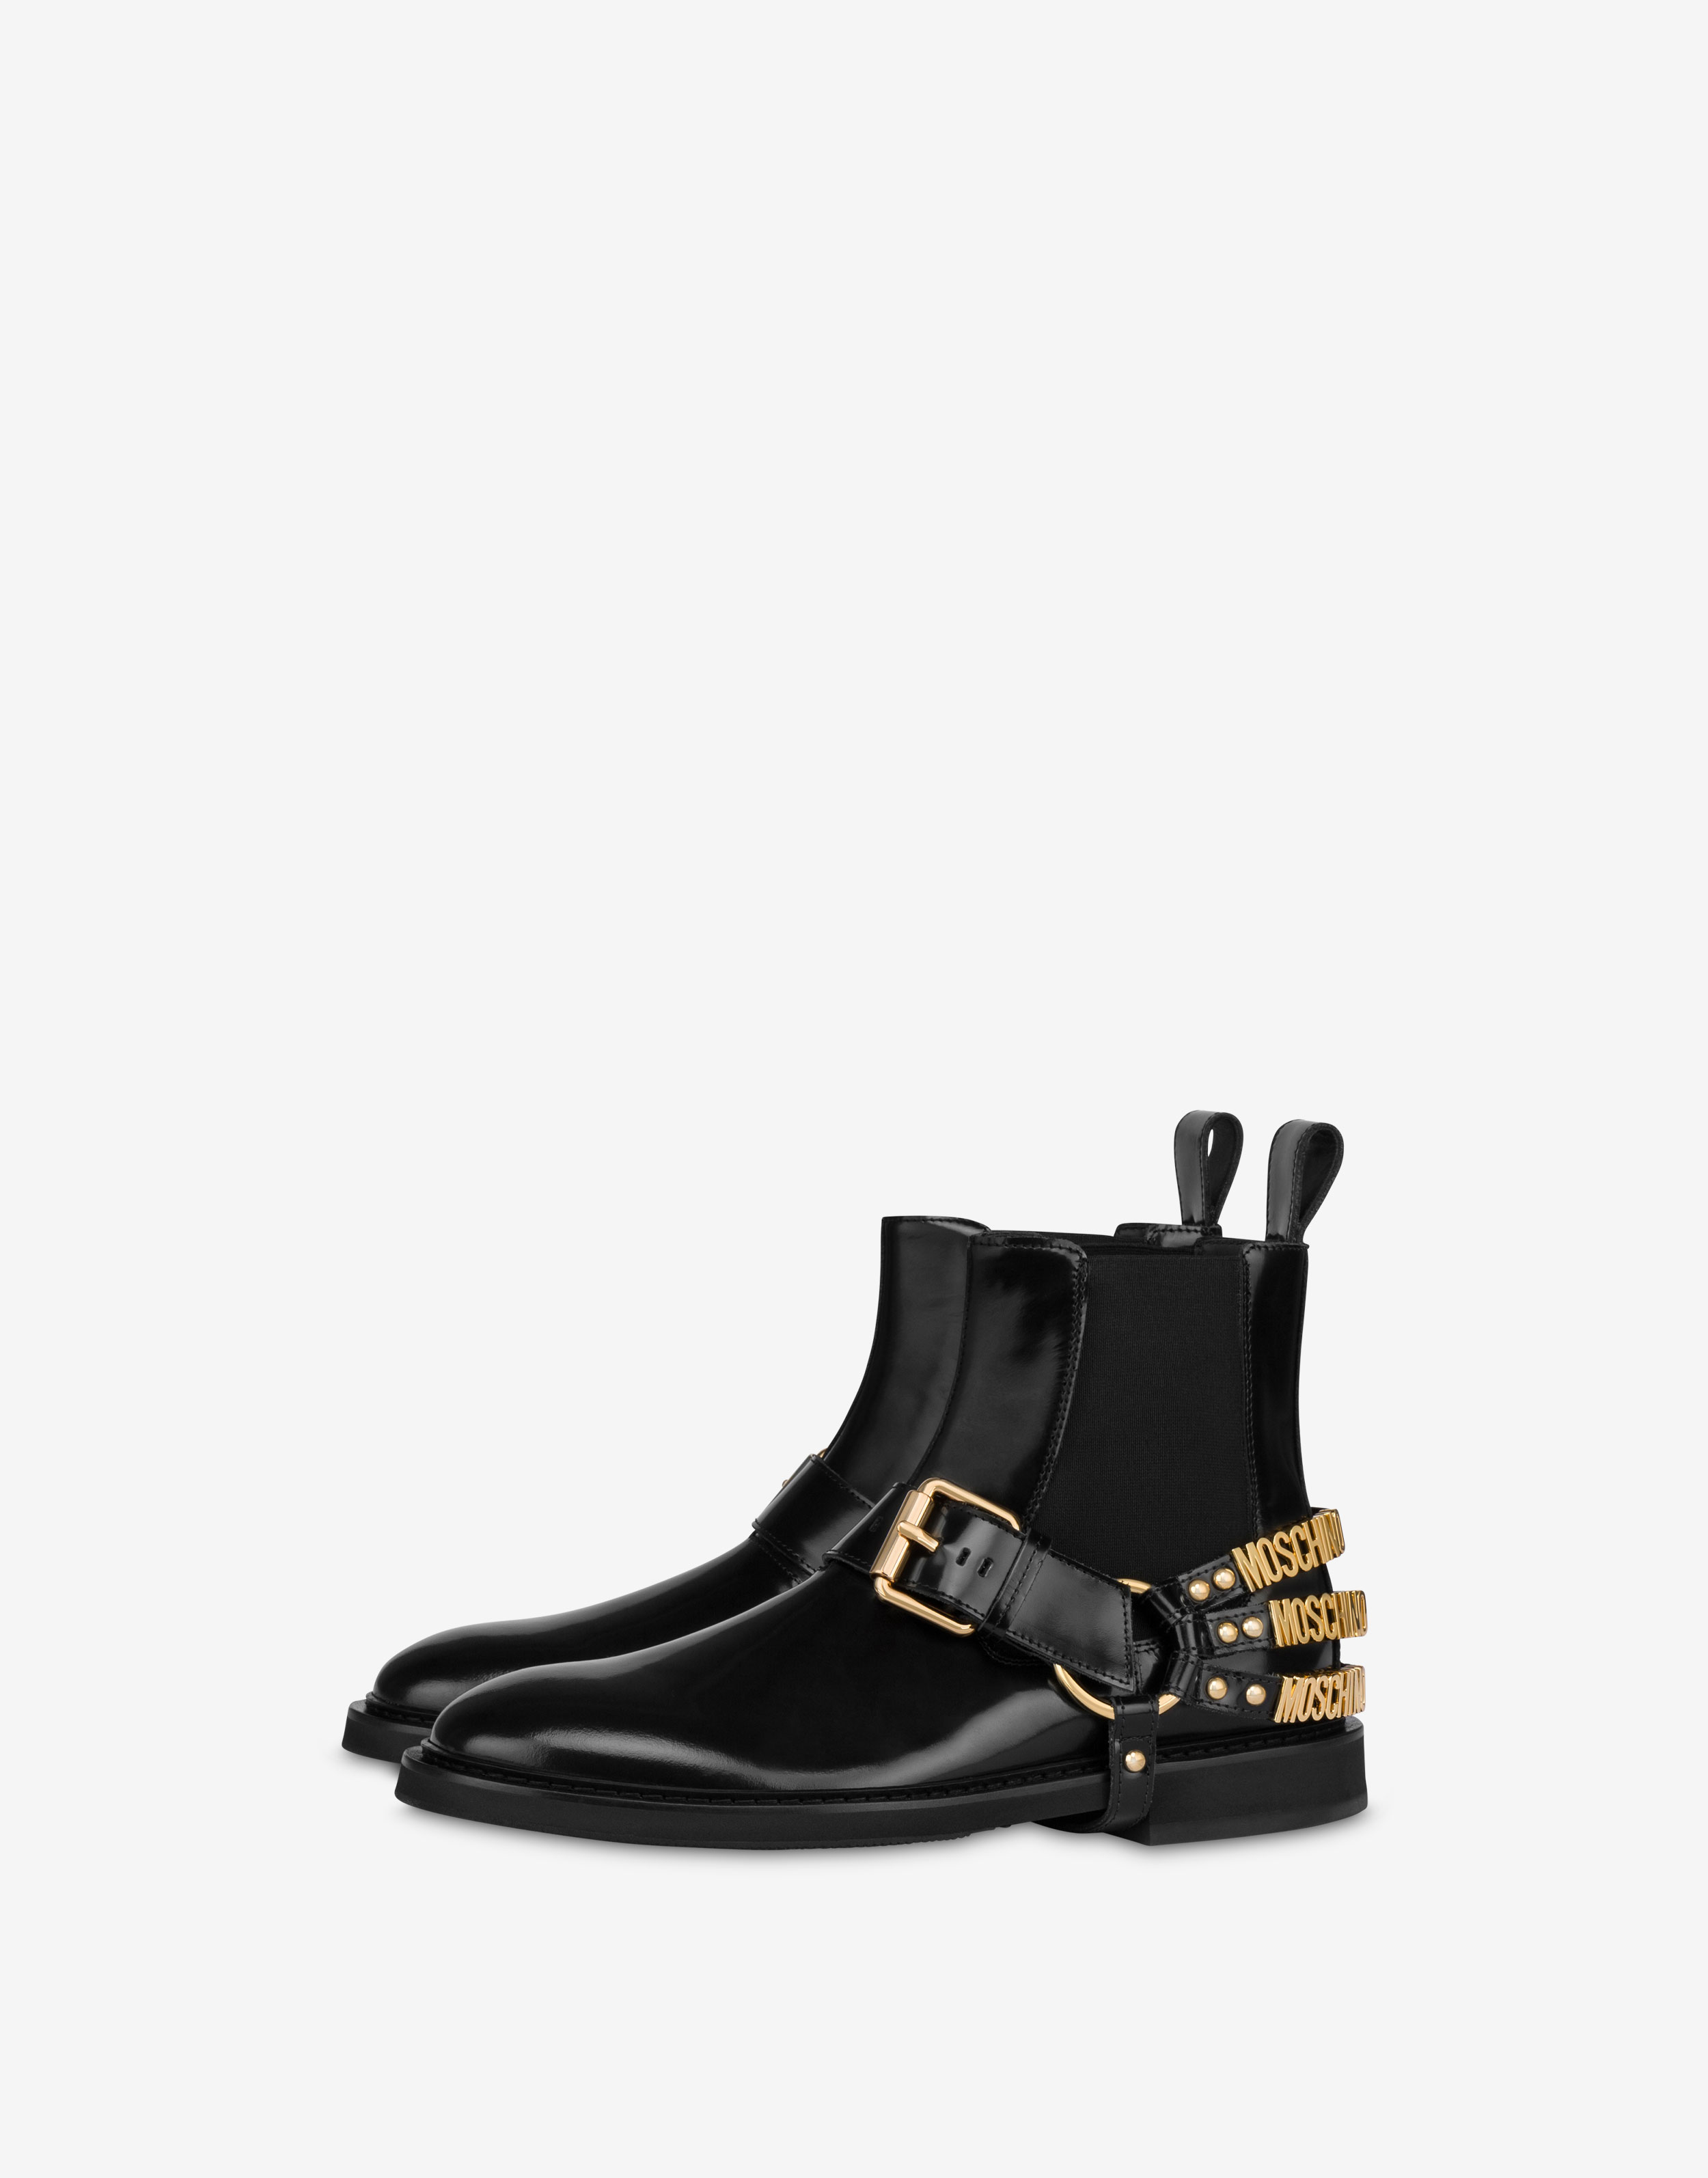 Moschino Boots for Hombre - Official Store